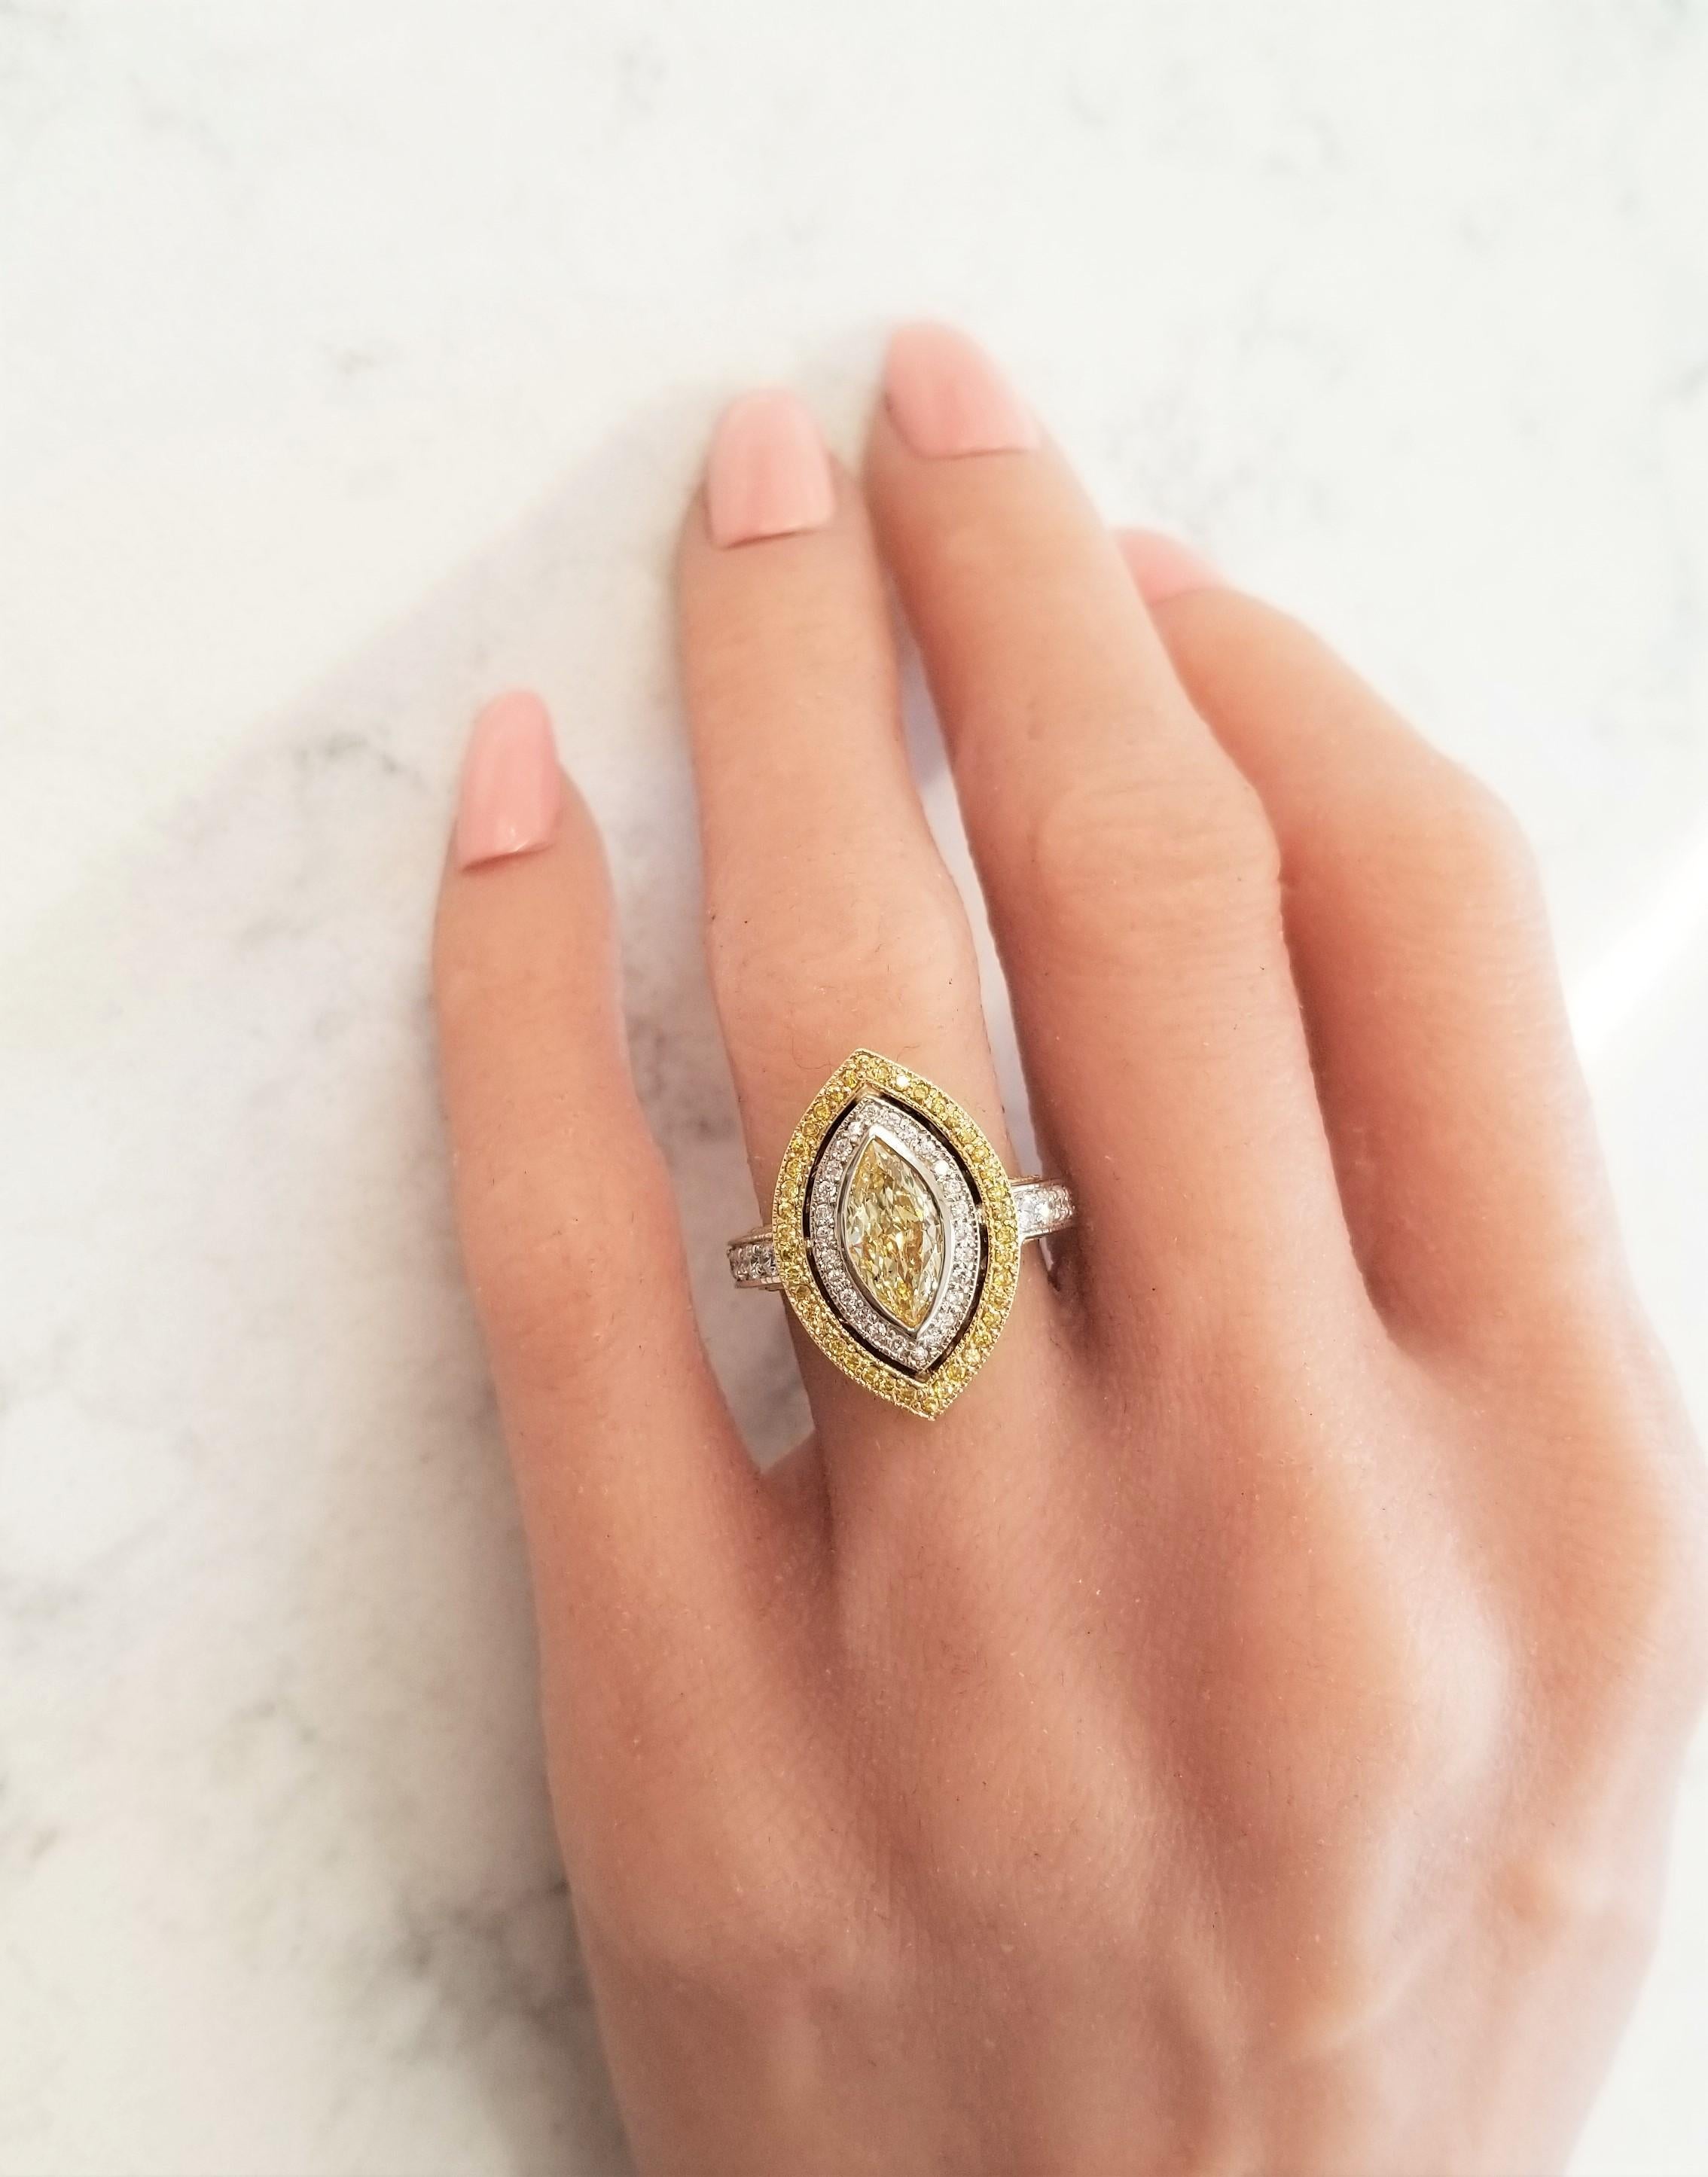 This eye-catching, attention stealing ring is every bit a glamorous as you imagine it to be. There are almost too many incredible design elements to highlight, but we are sure going to give it a try. First, off this stunner is crafted of 18 Karat